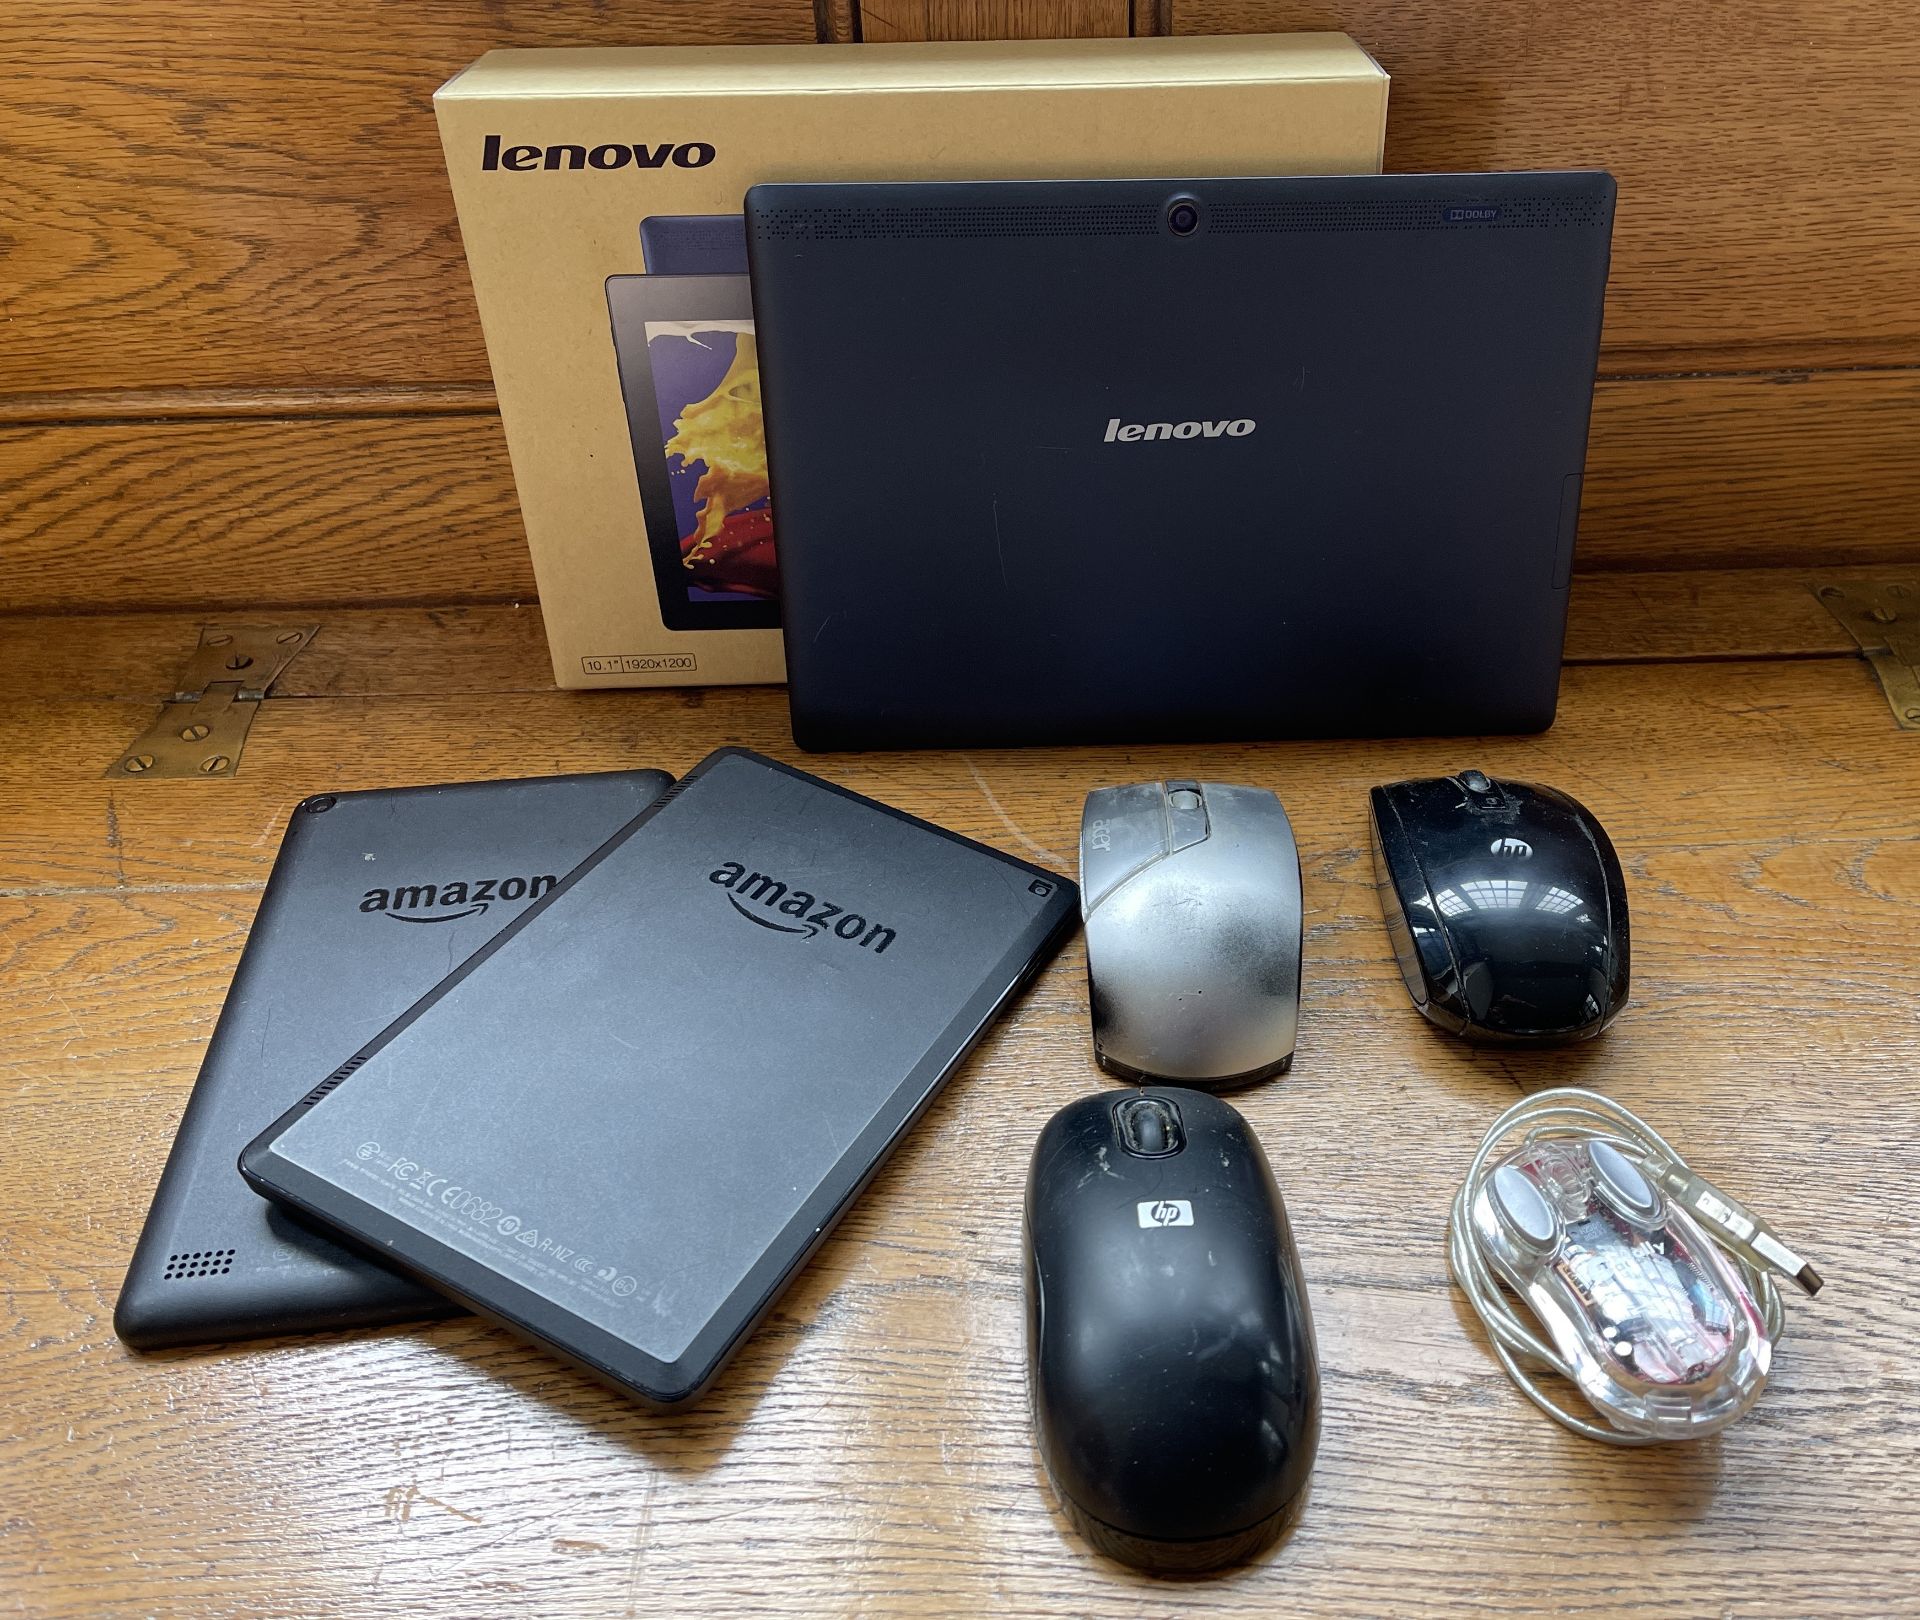 LENOVO TABLET AND TWO AMAZON TABLETS , LOT OF 4 MICE - Image 2 of 3